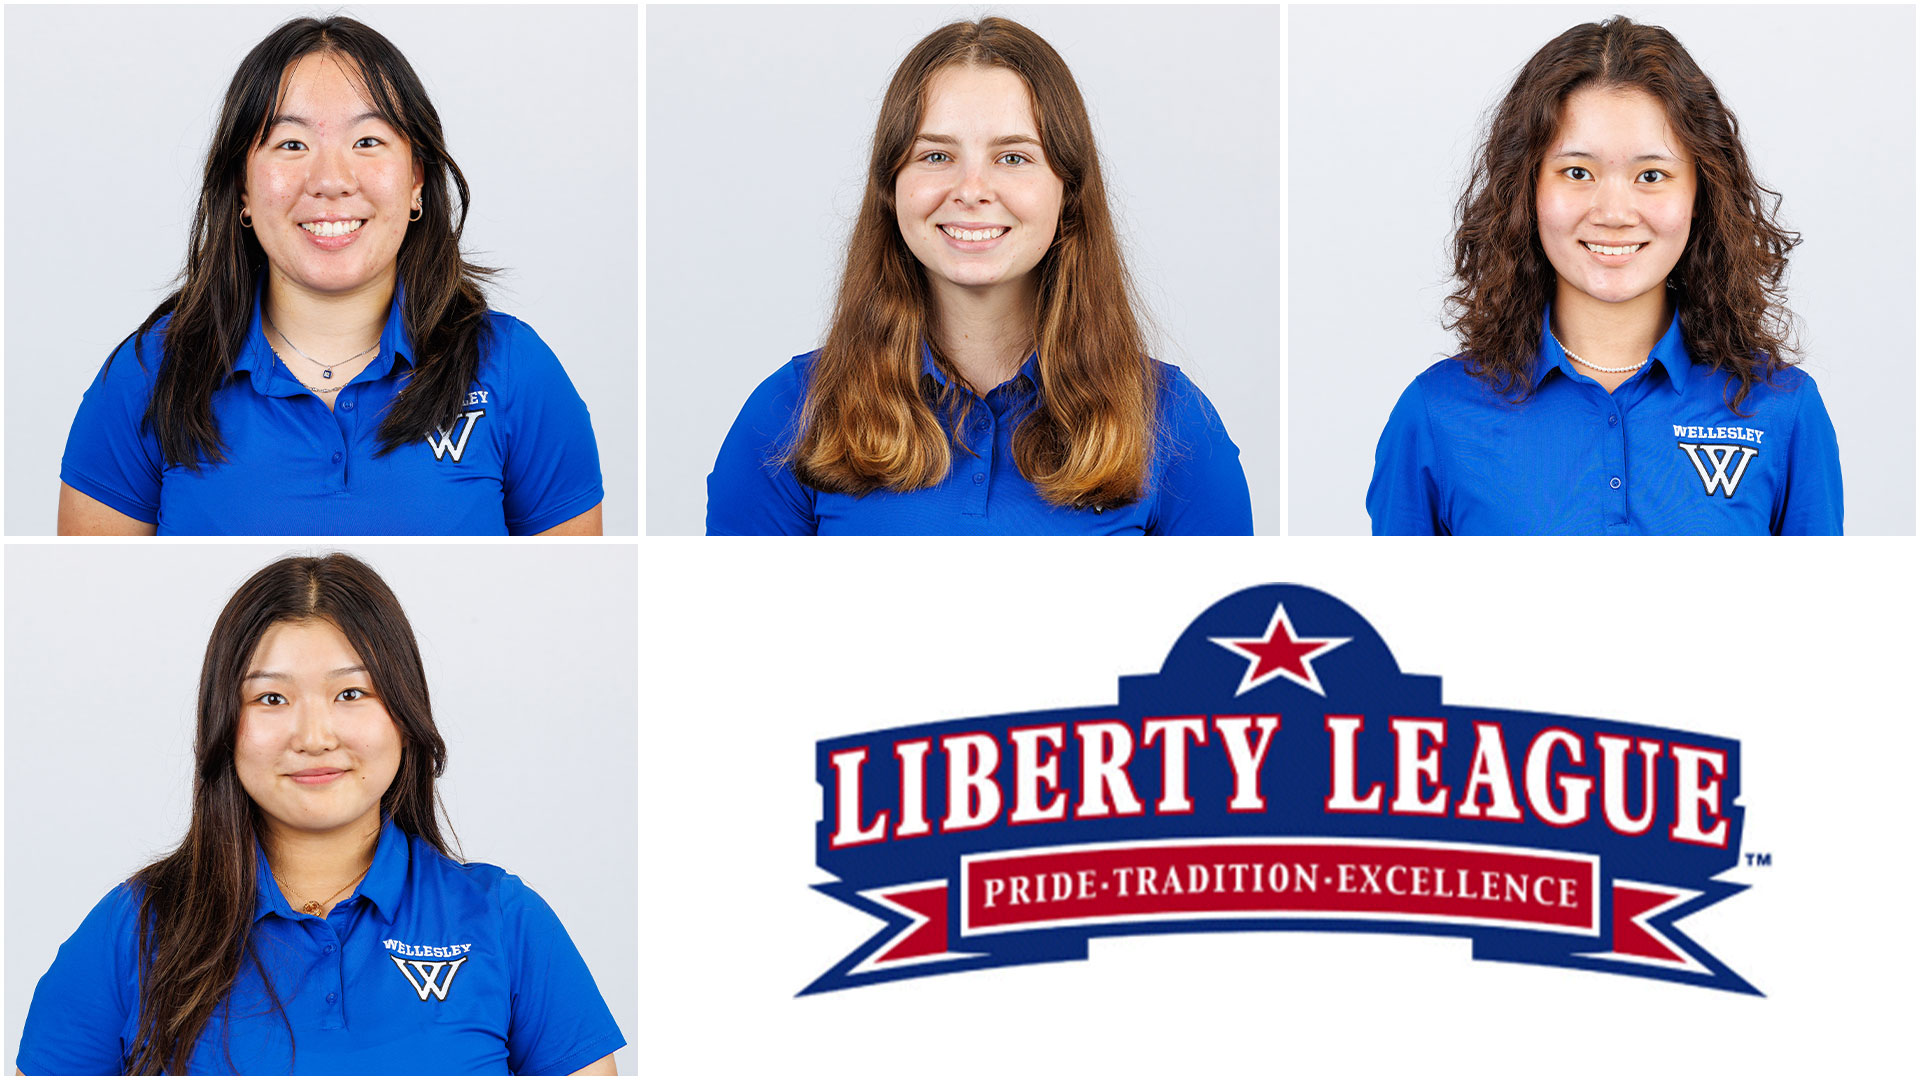 Four members of Wellesley Golf made the Liberty League All-Academic Team (Frank Poulin)